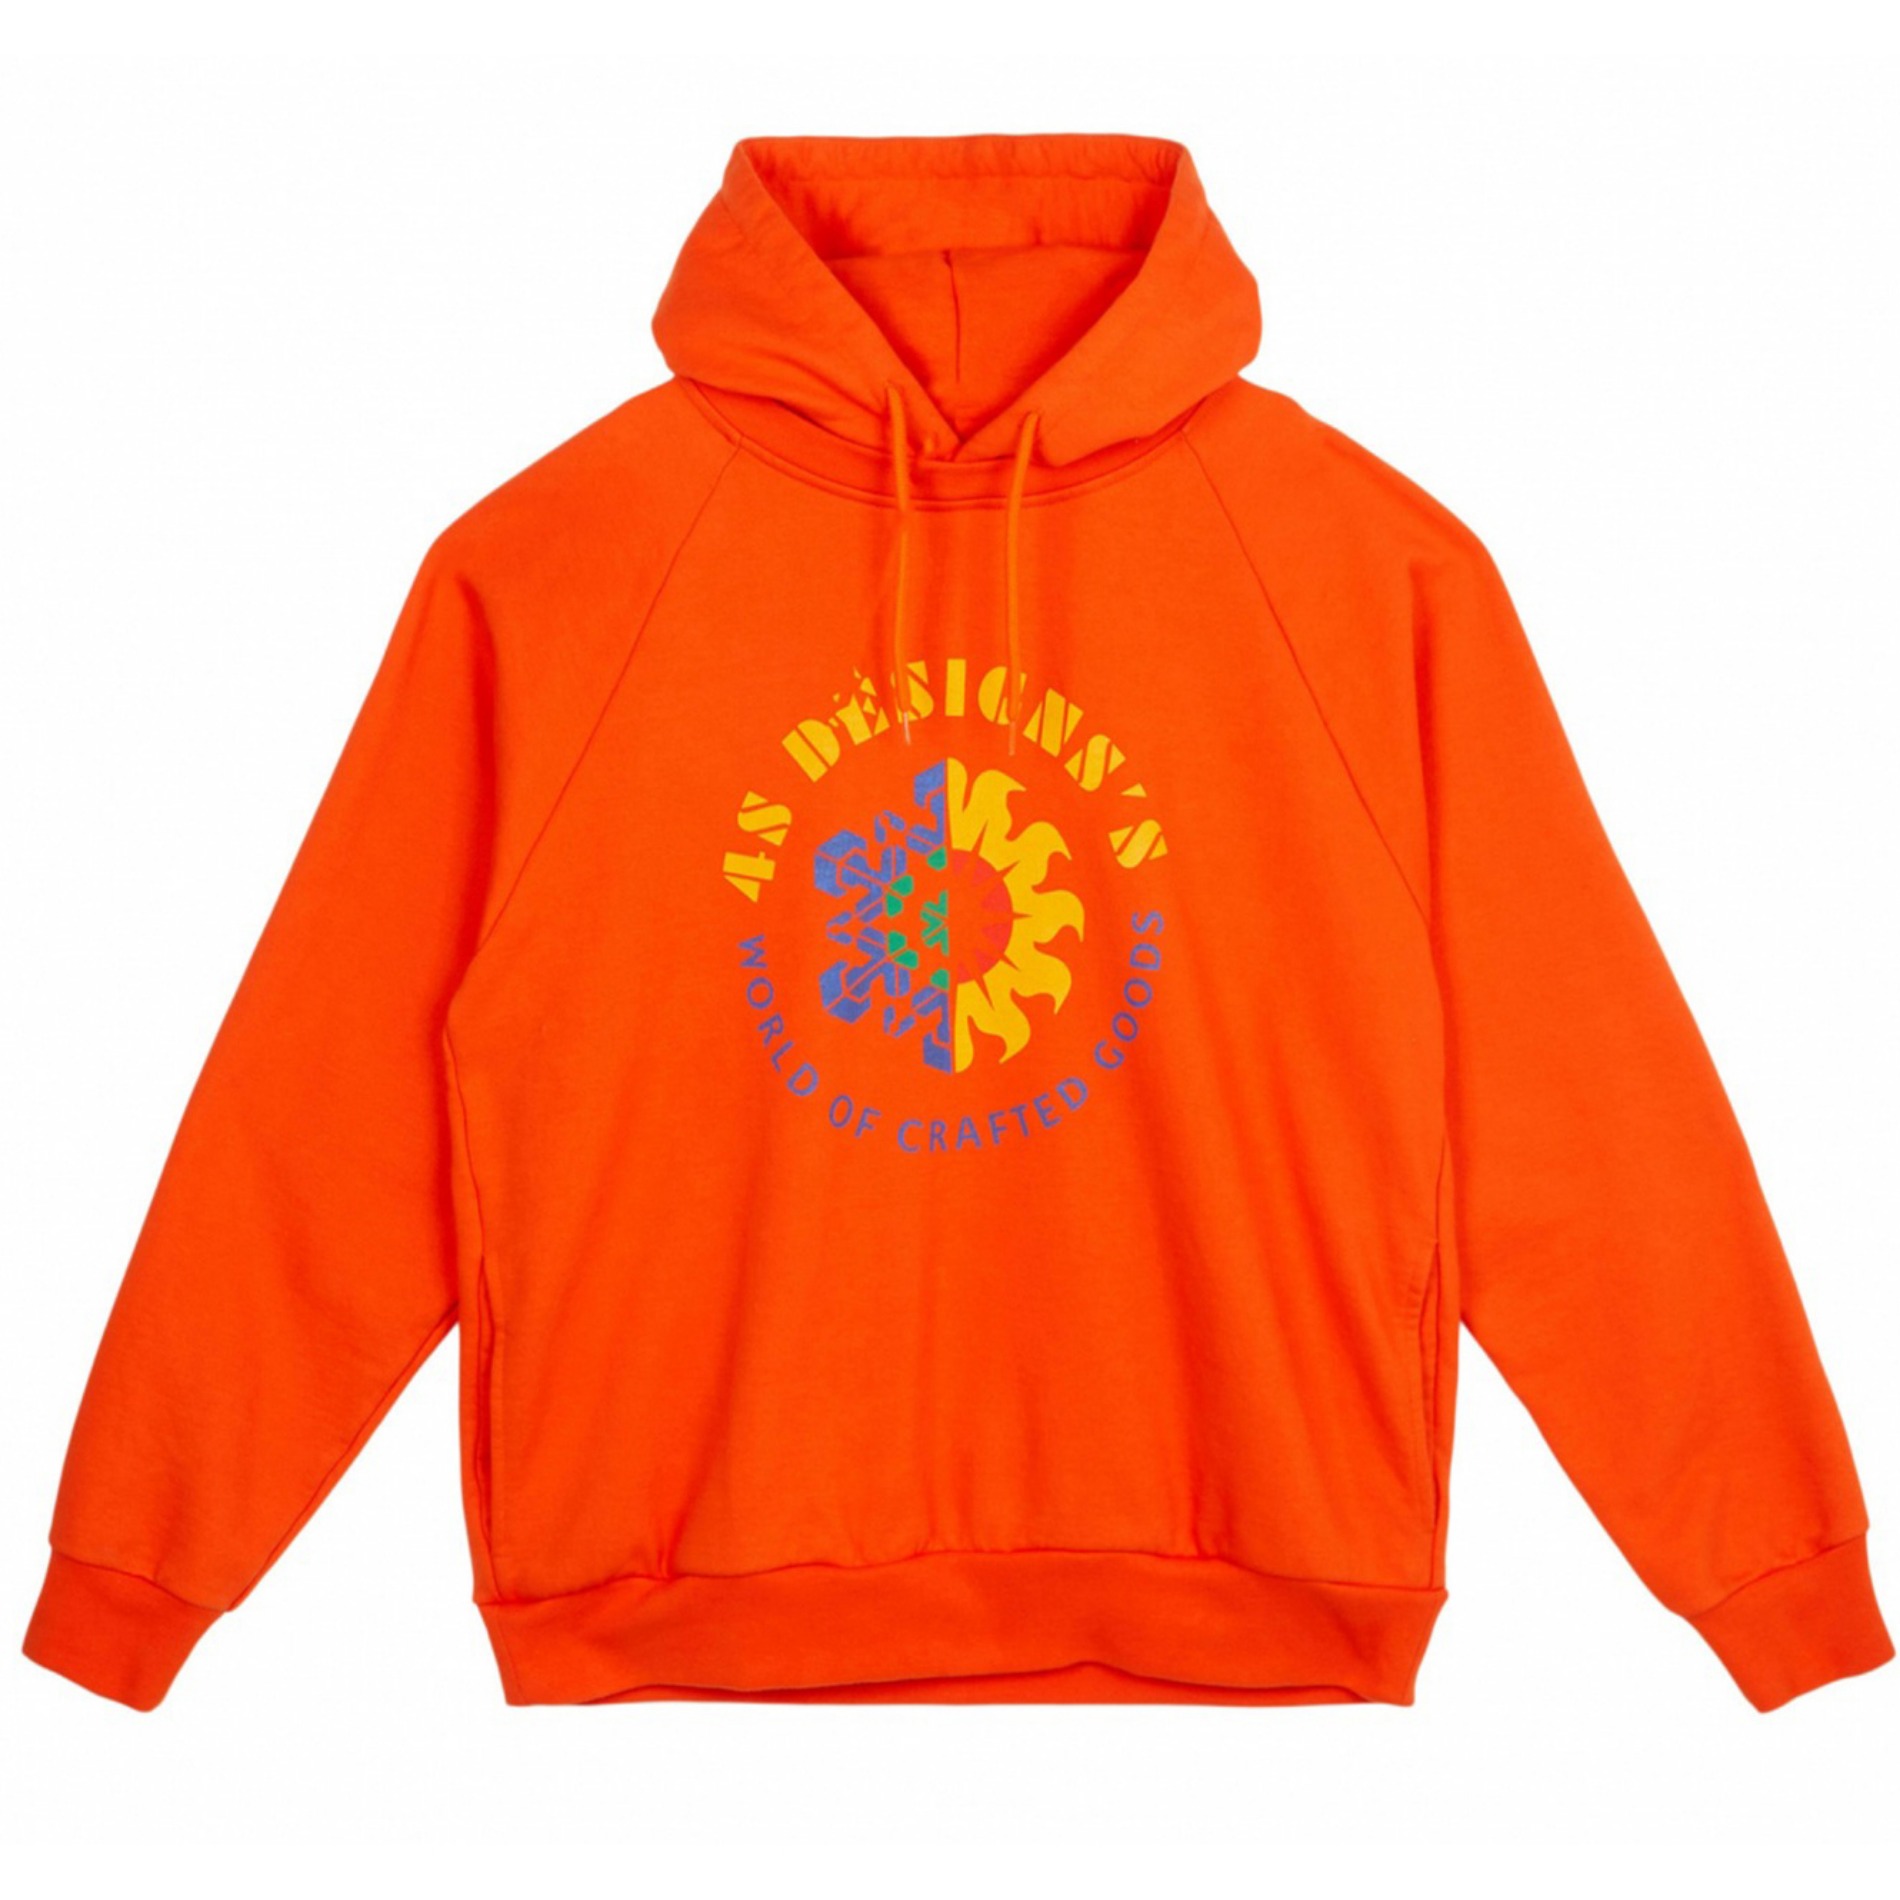 4SDESIGNS HOODIE IN ORANGE FRENCH TERRY